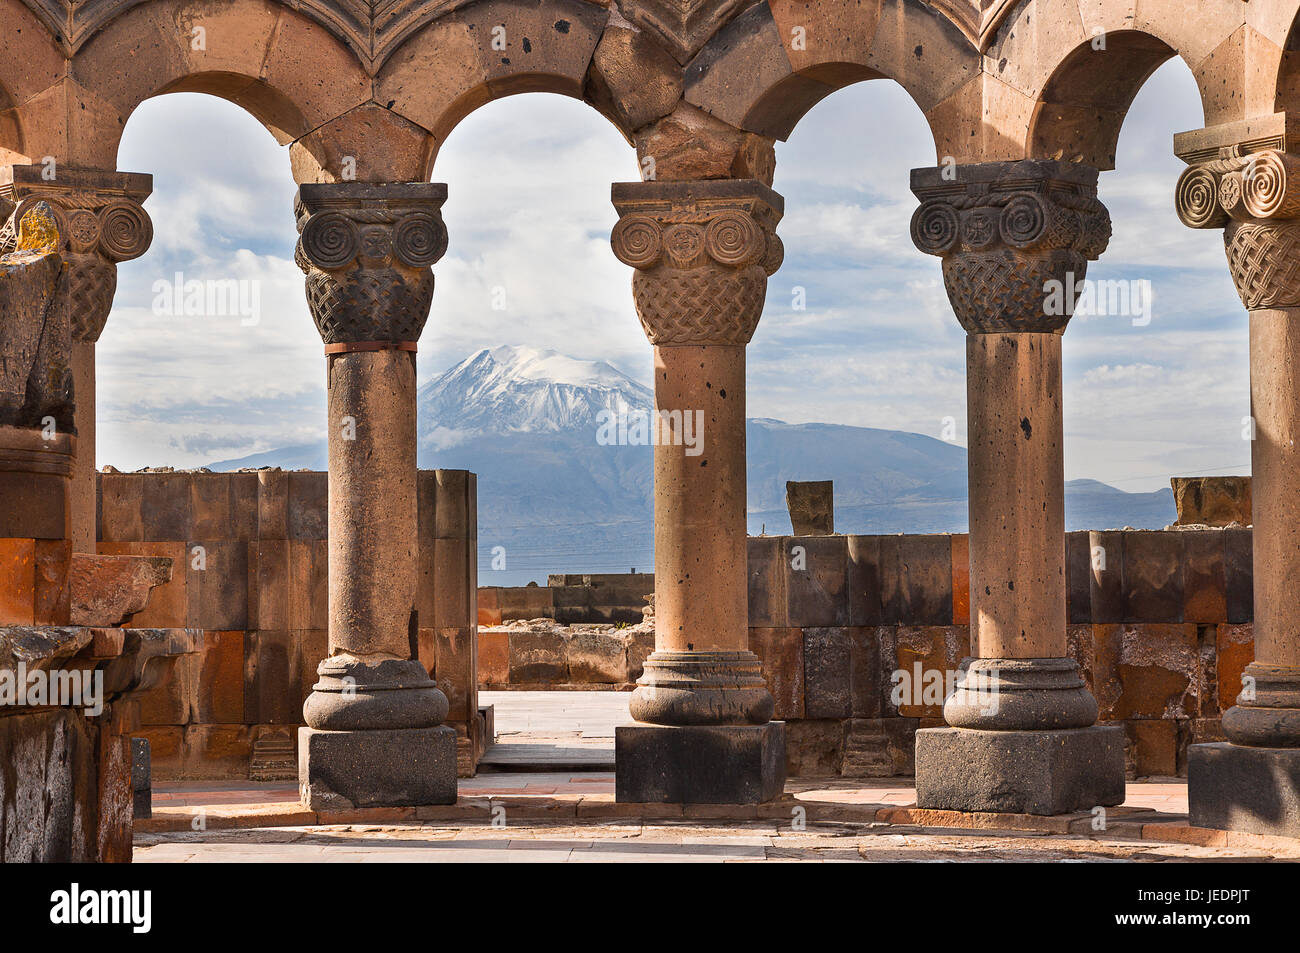 Ruins of the Temple of Zvartnots with Mt Ararat in the background, Armenia. Stock Photo